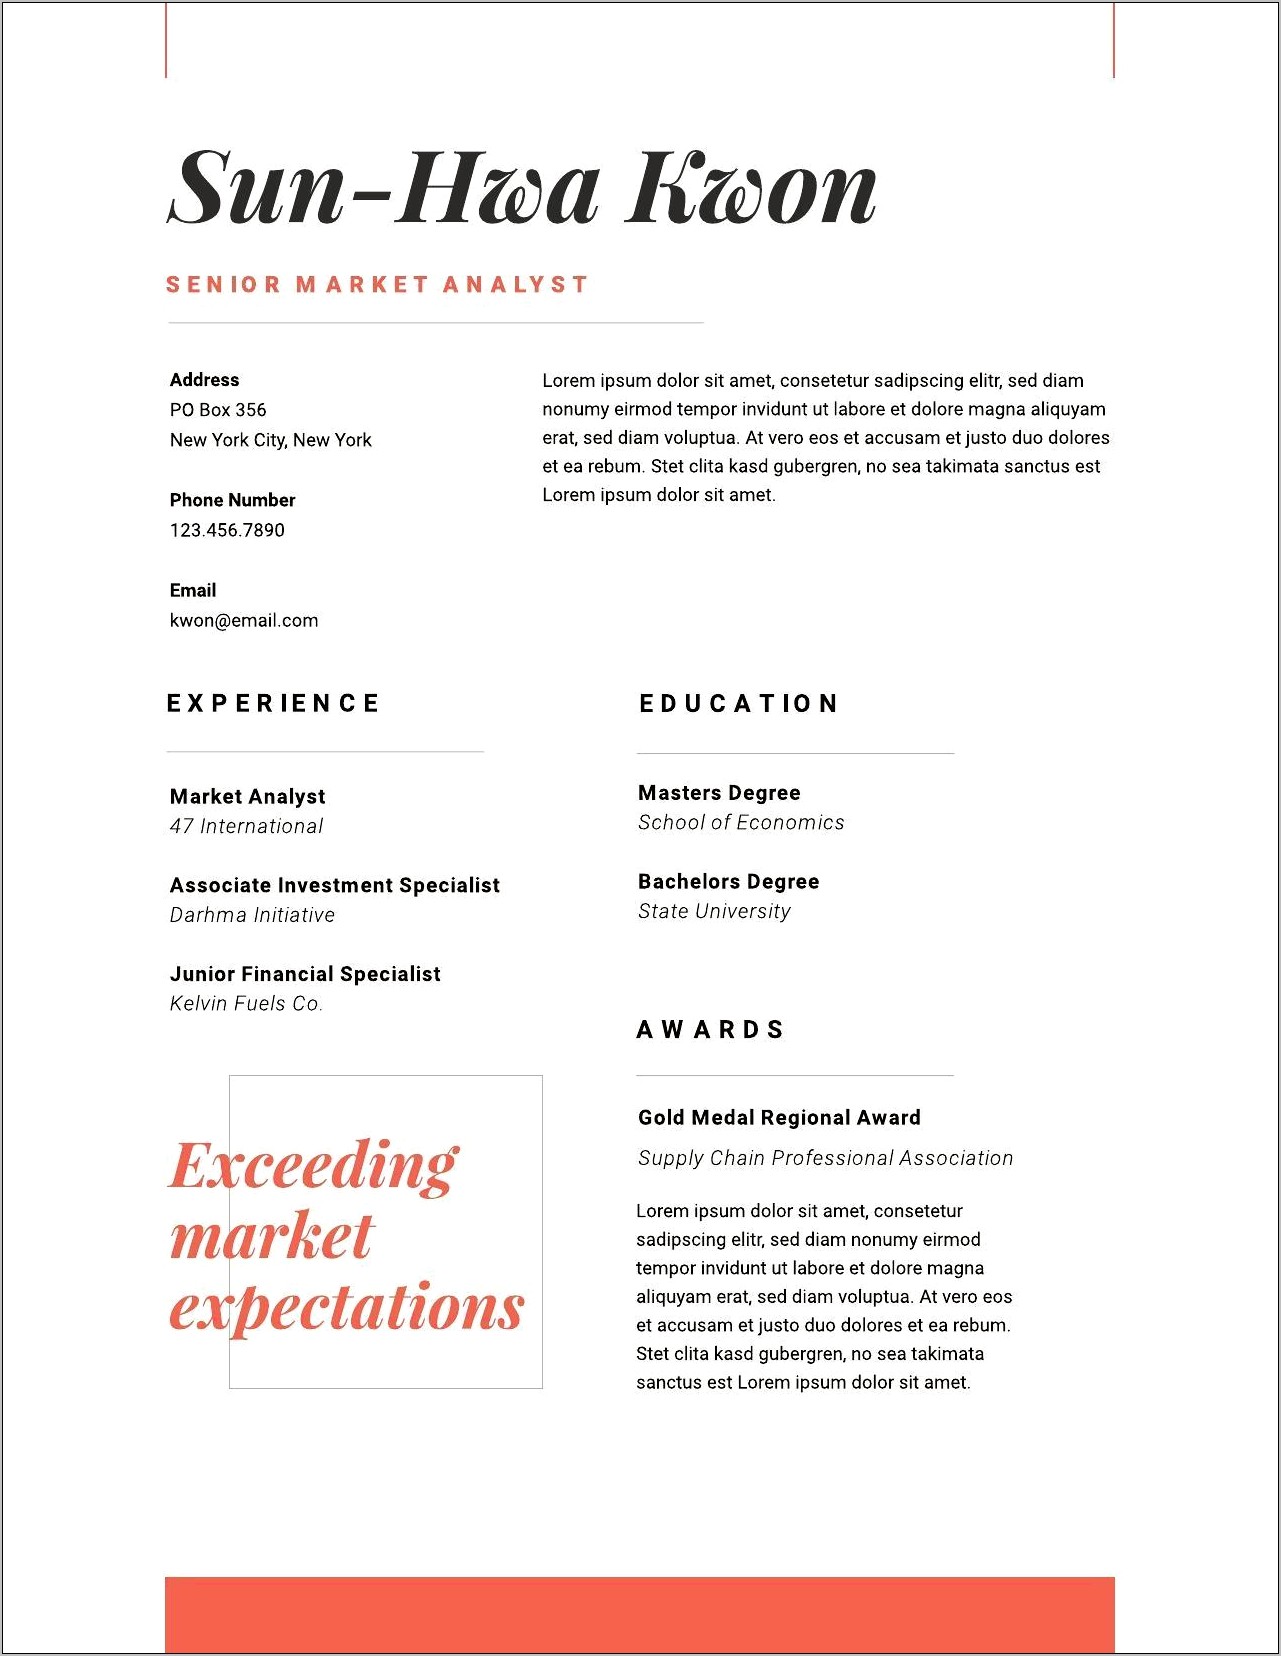 Short Pitch For Resume Example